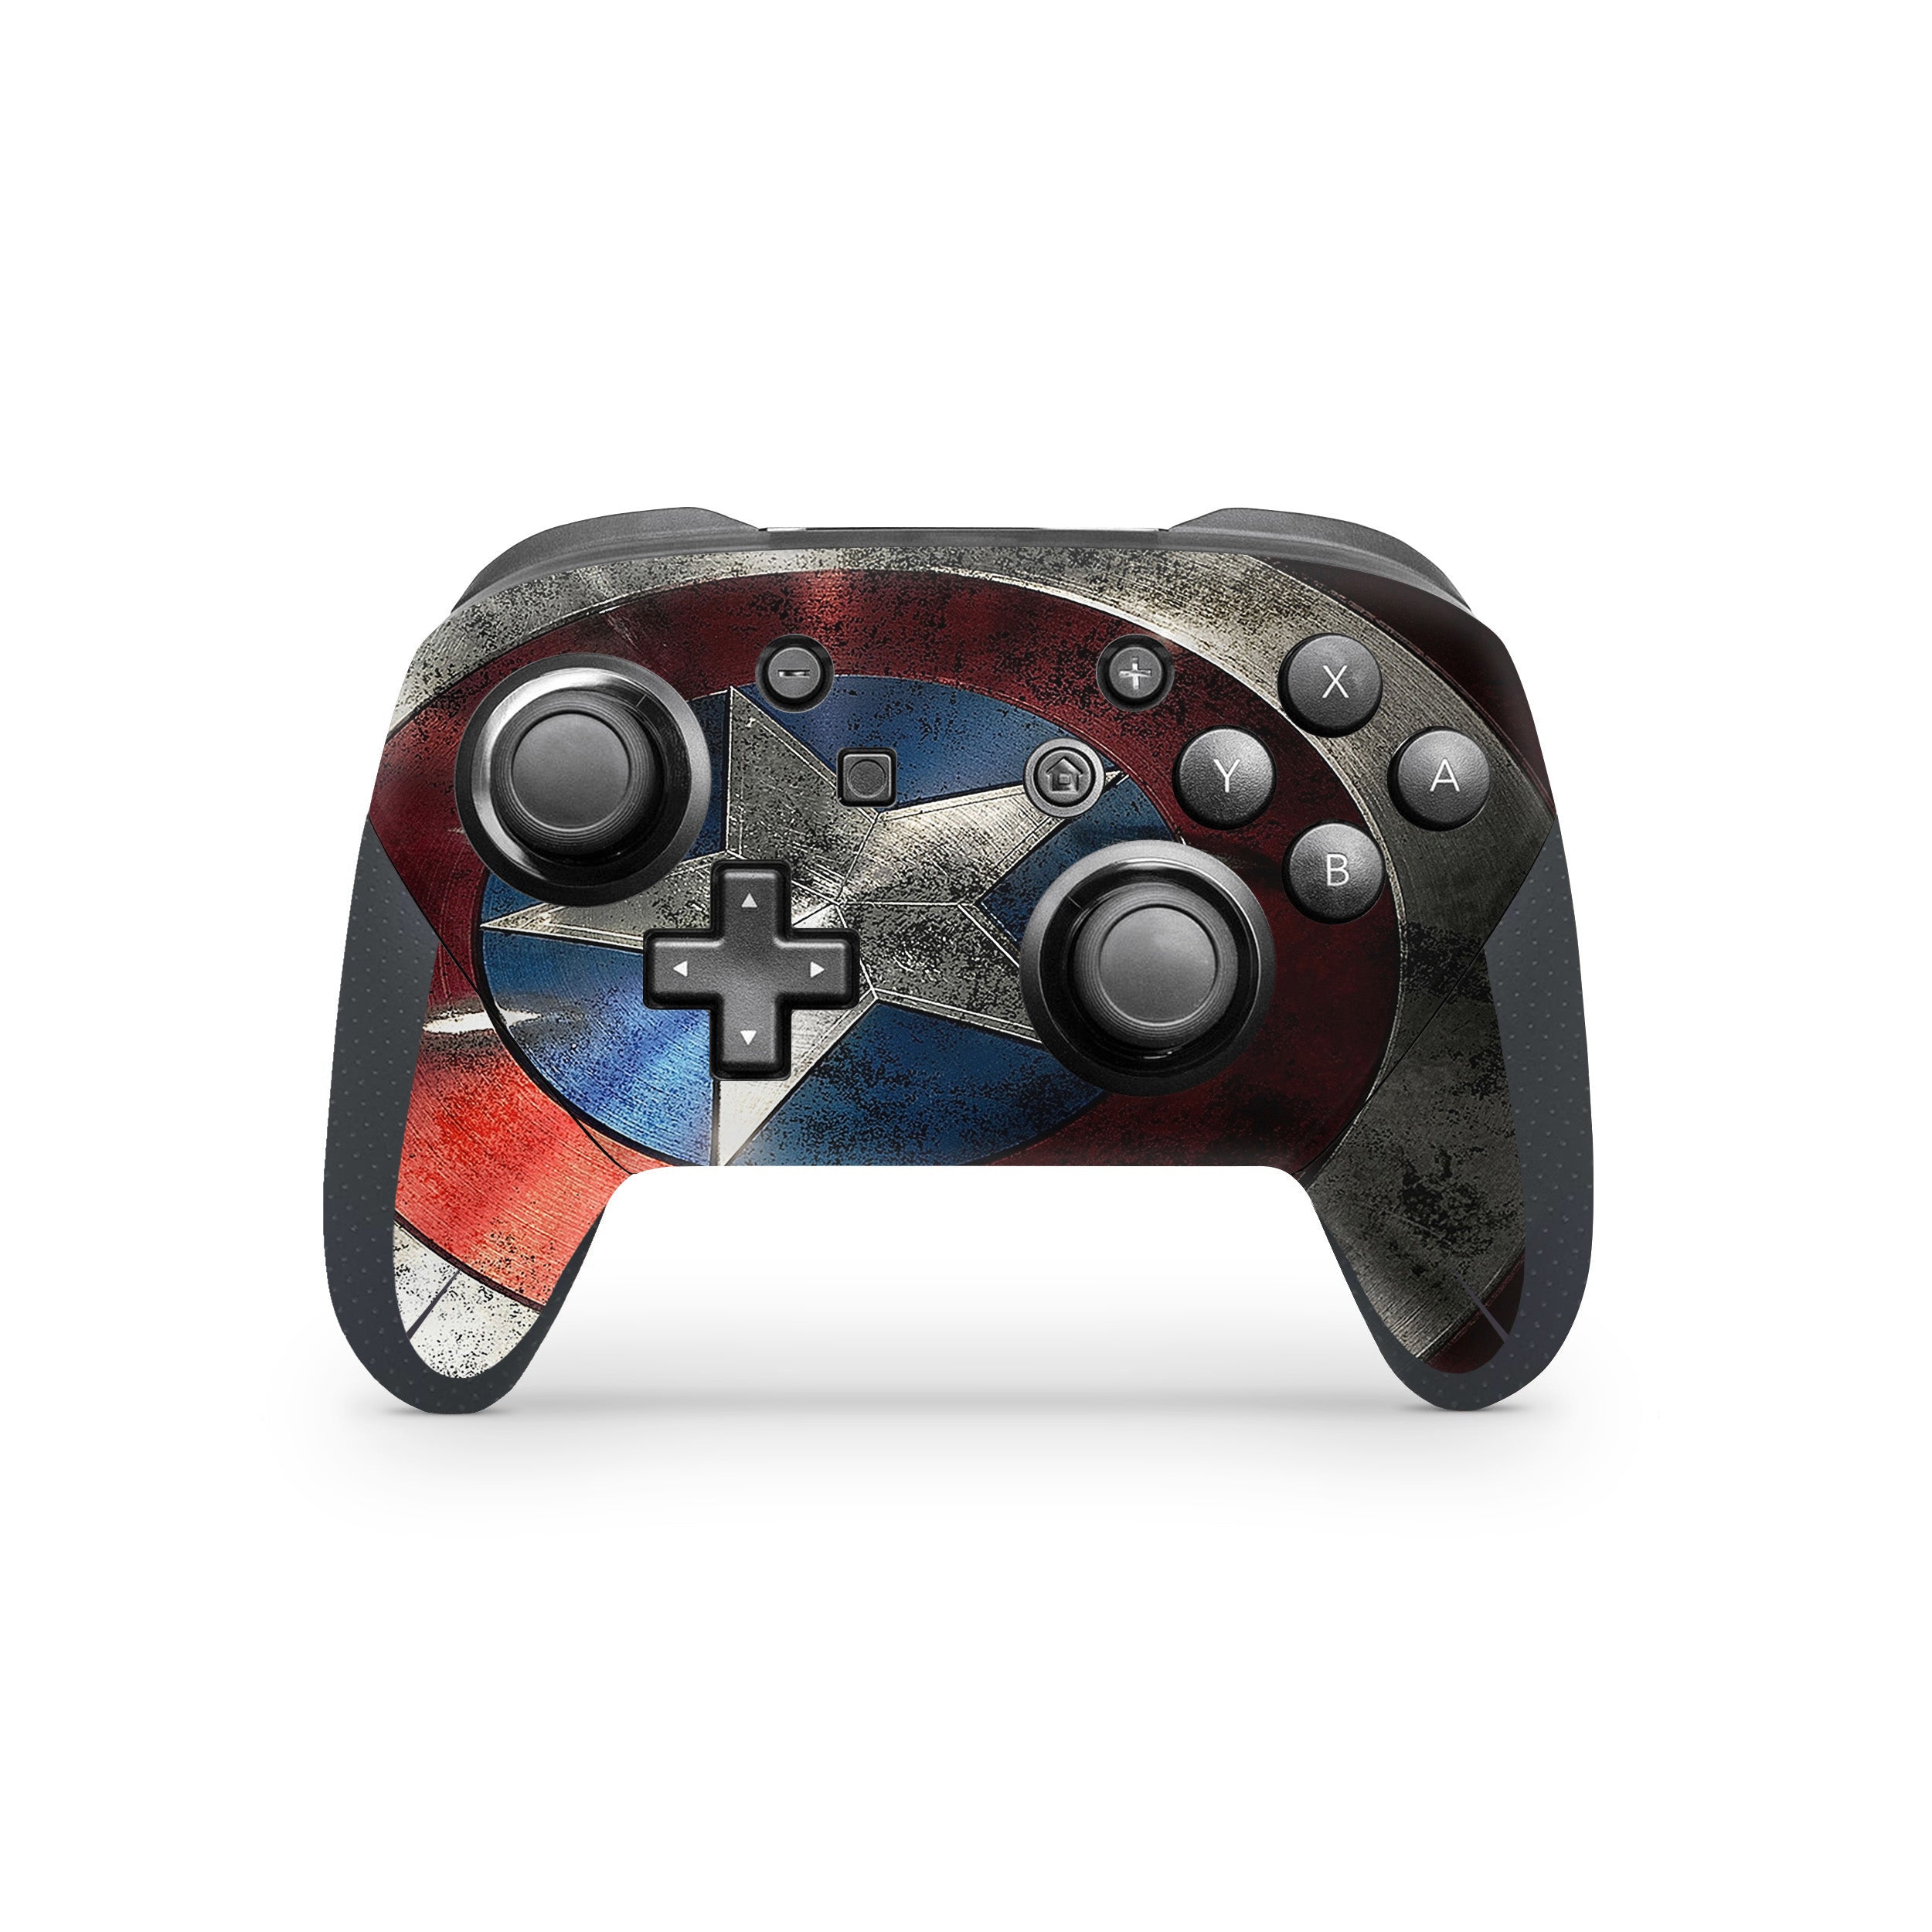 A video game skin featuring a Marvel Captain America design for the Switch Pro Controller.